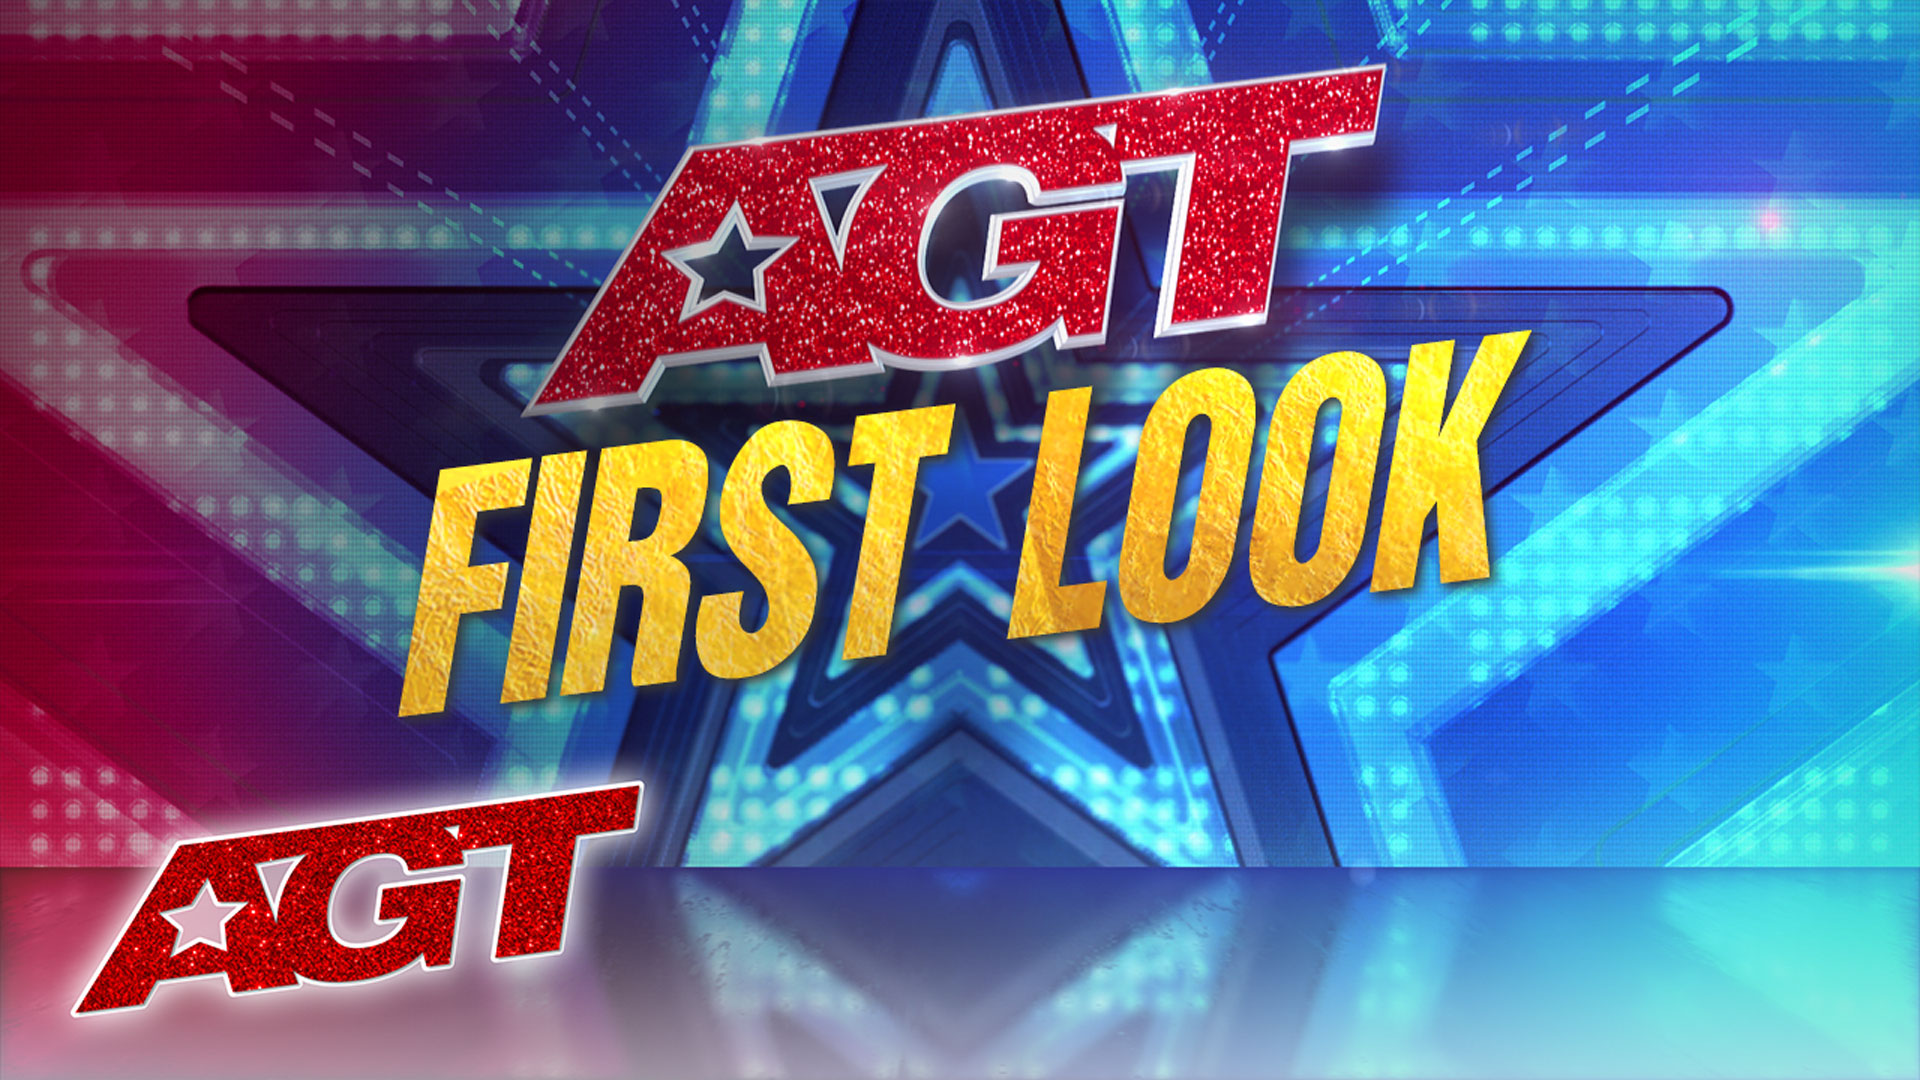 Watch America's Got Talent Current Preview A First Look at the NEW